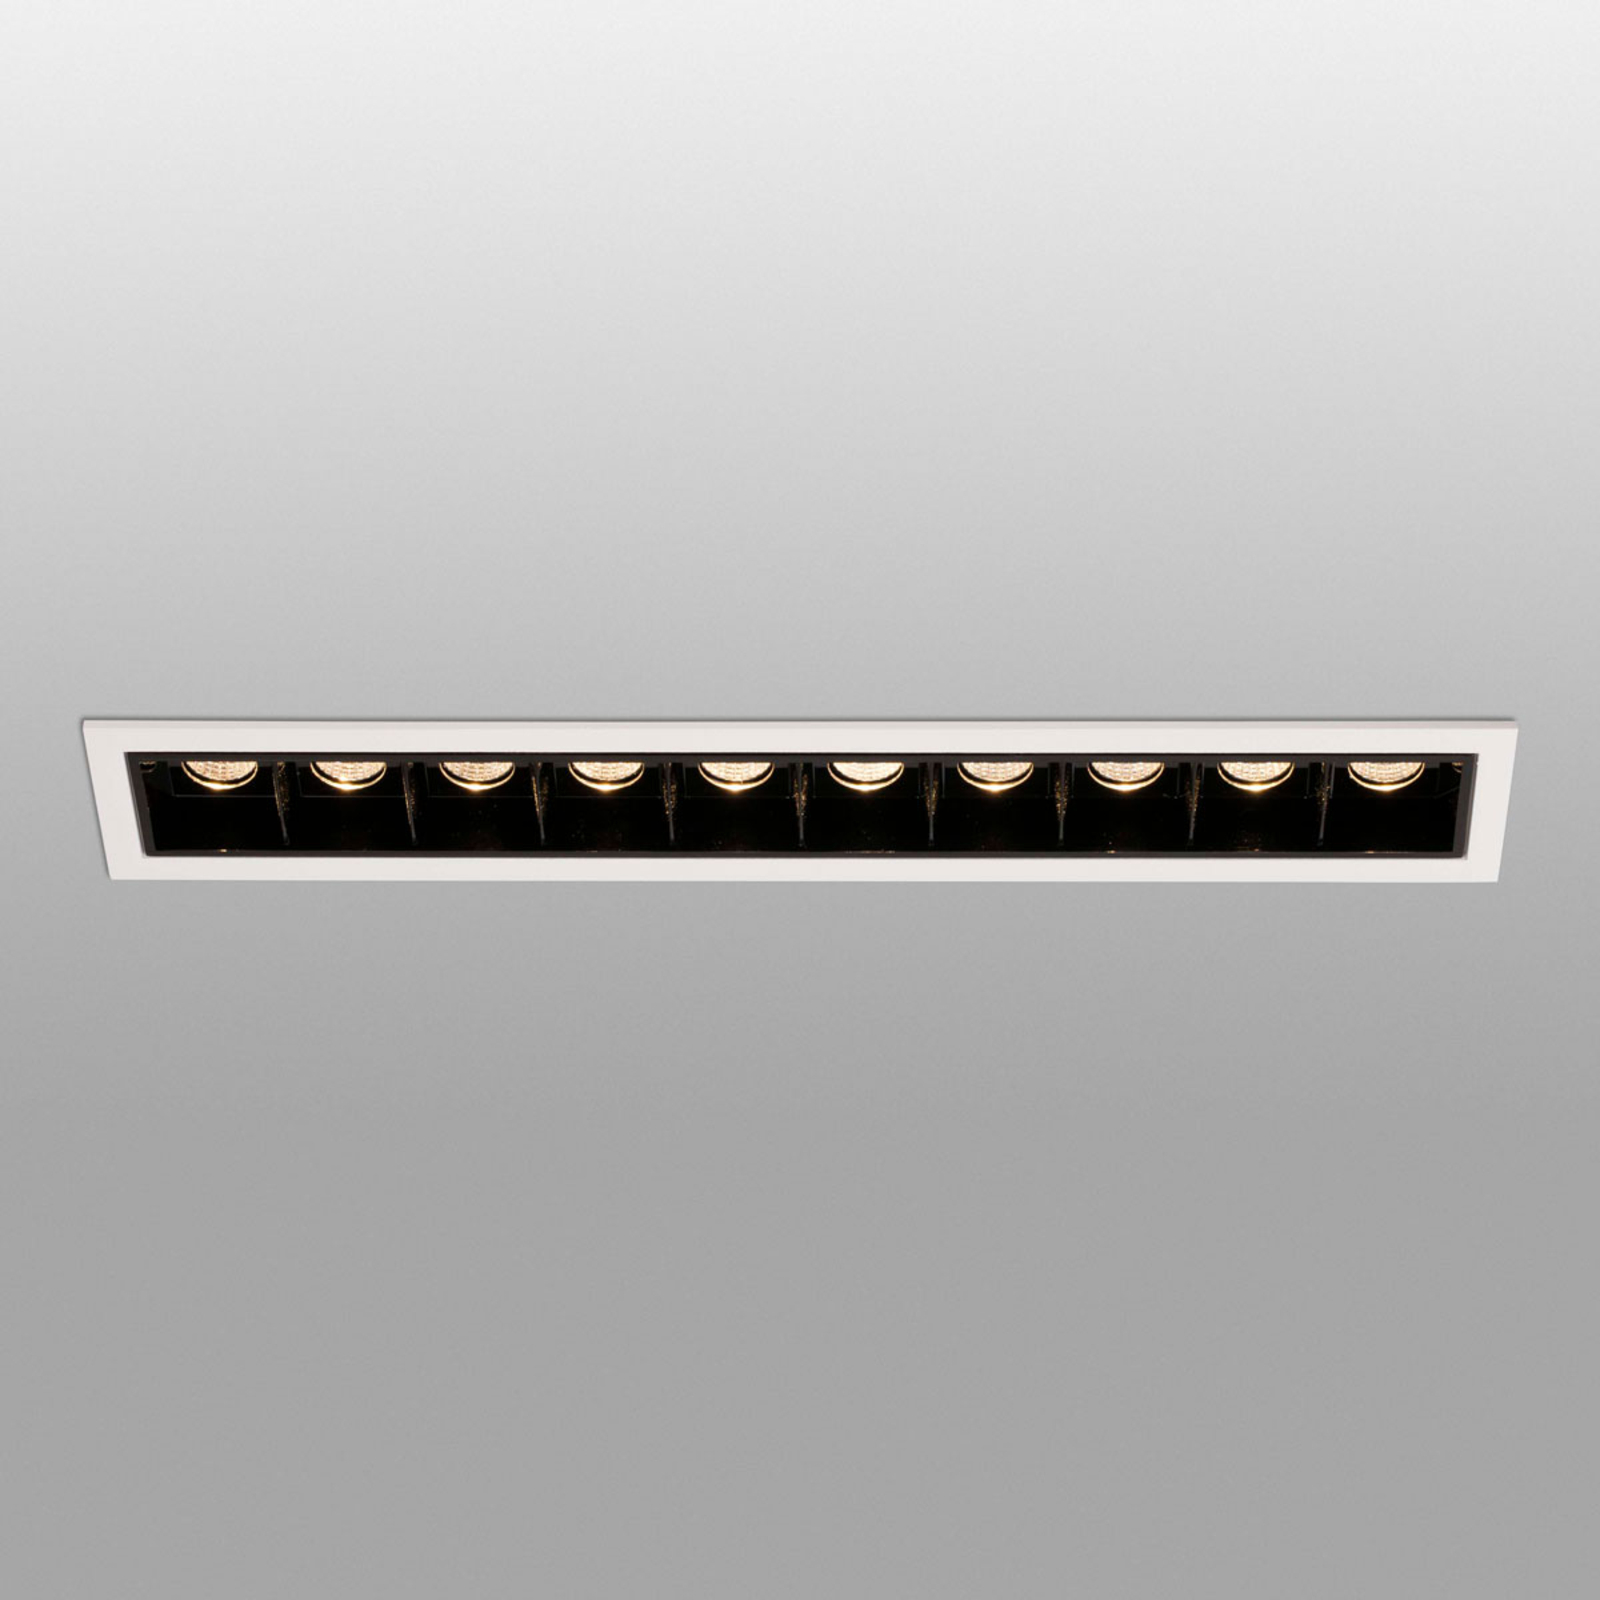 Troop LED recessed light with frame, 10-bulb